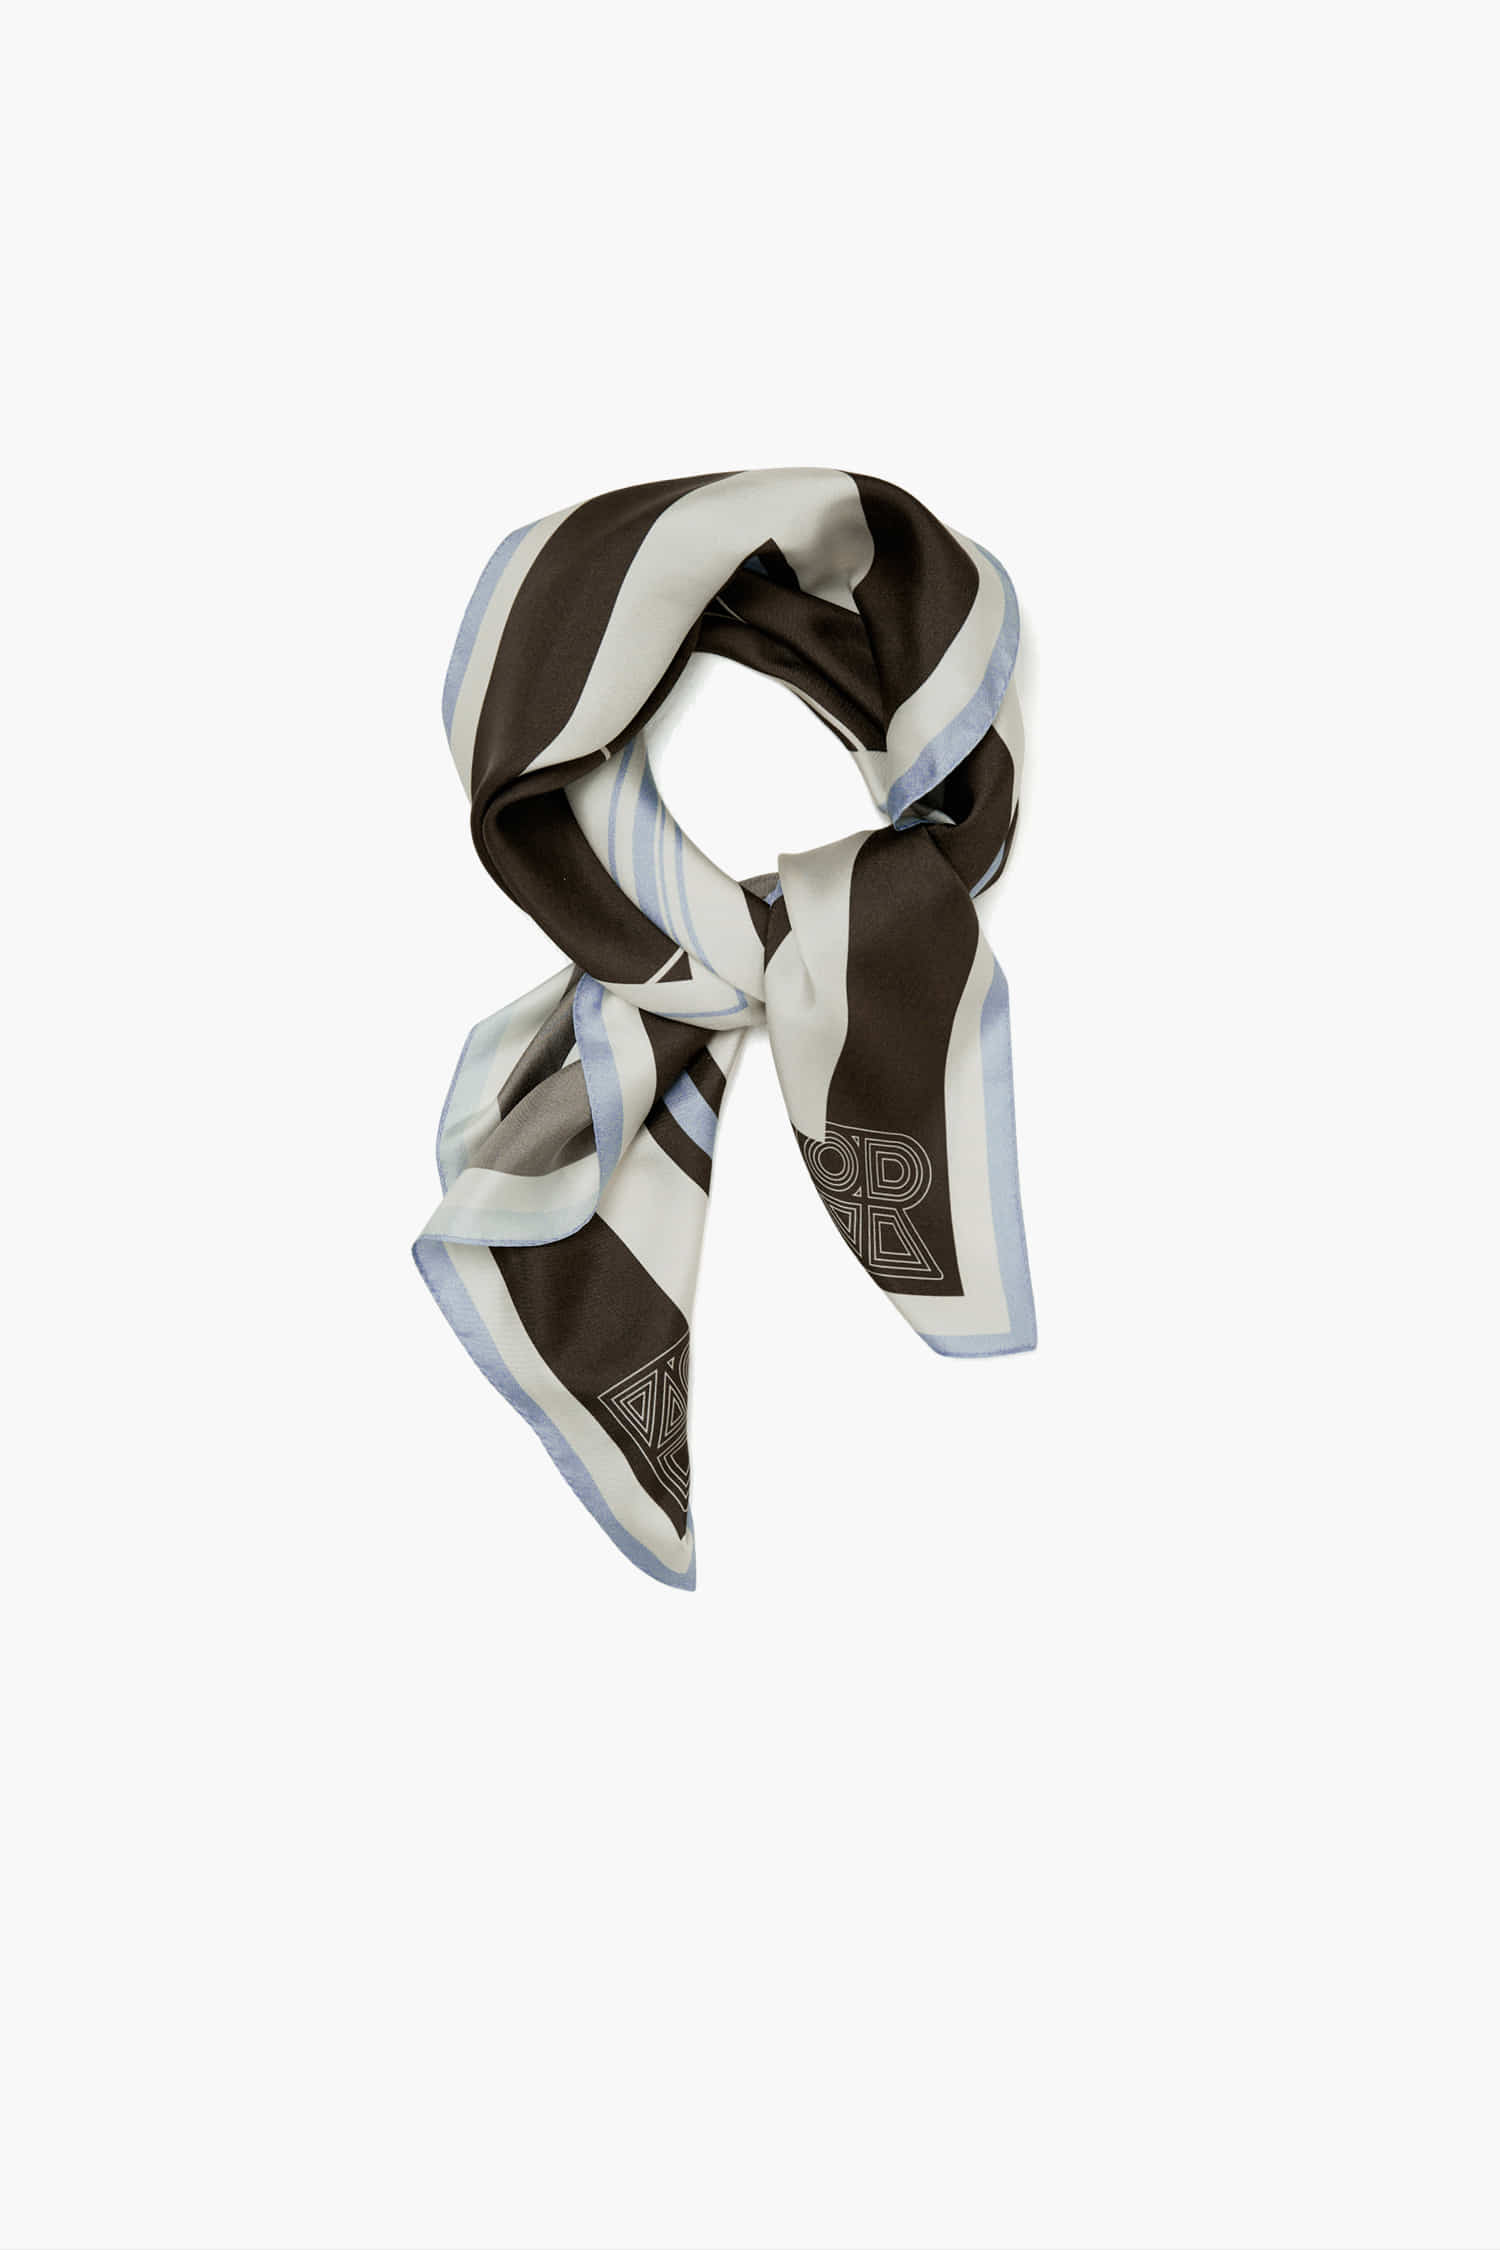 ENOR GRAPHIC SILK SCARF - BROWN